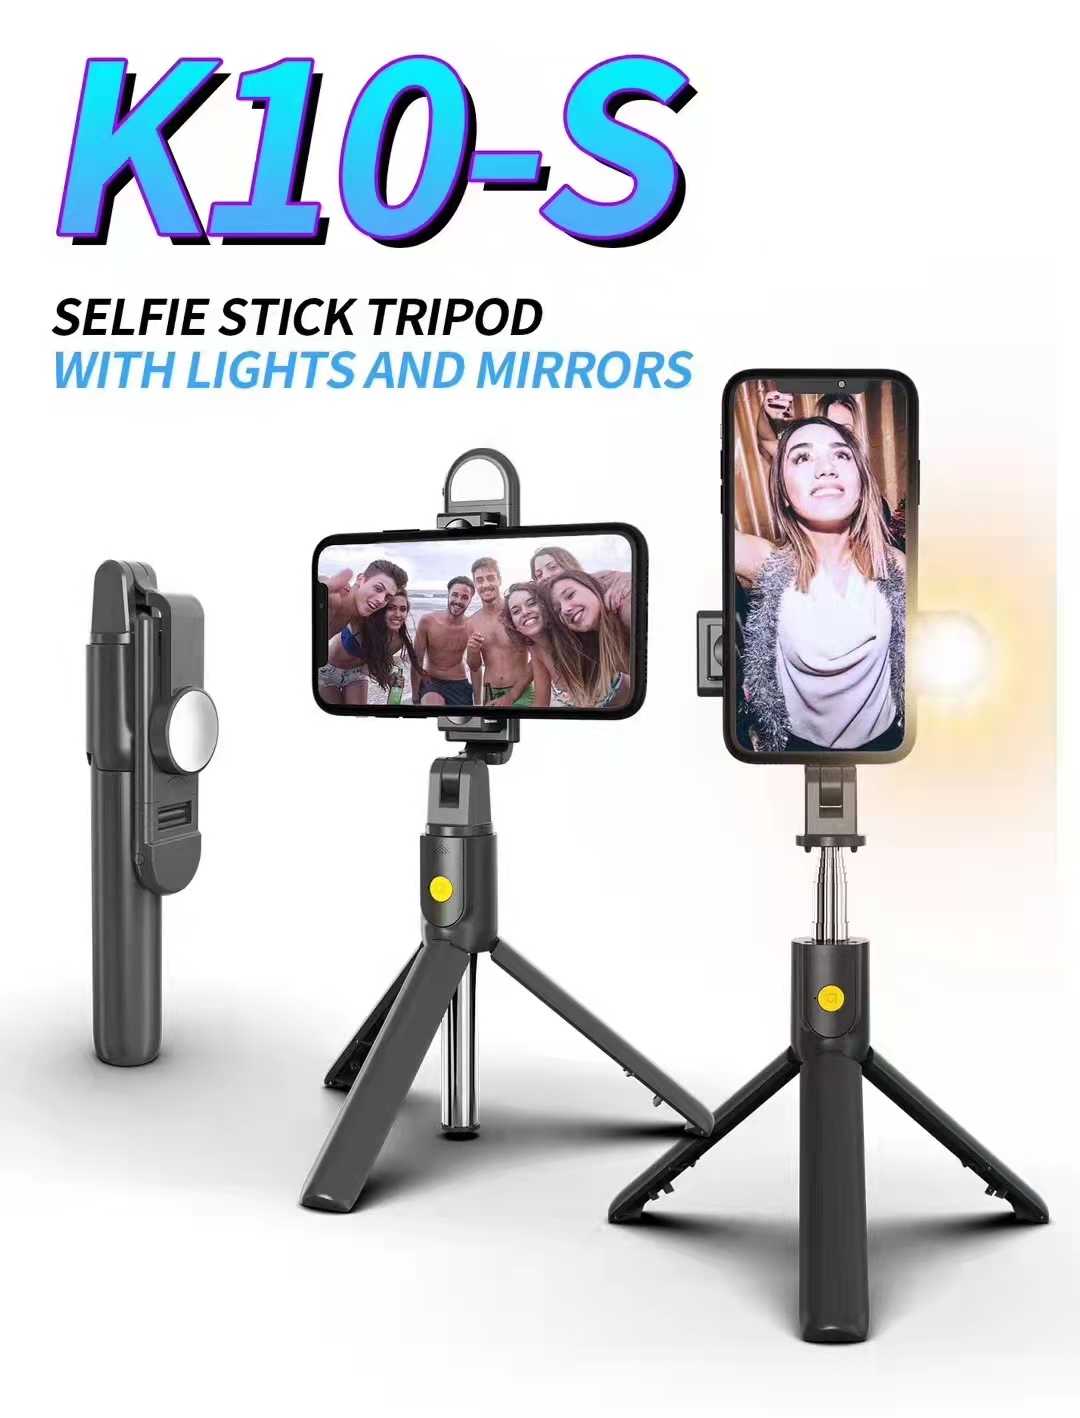 Selfie stick/stand τρίποδο – K10S – 882870